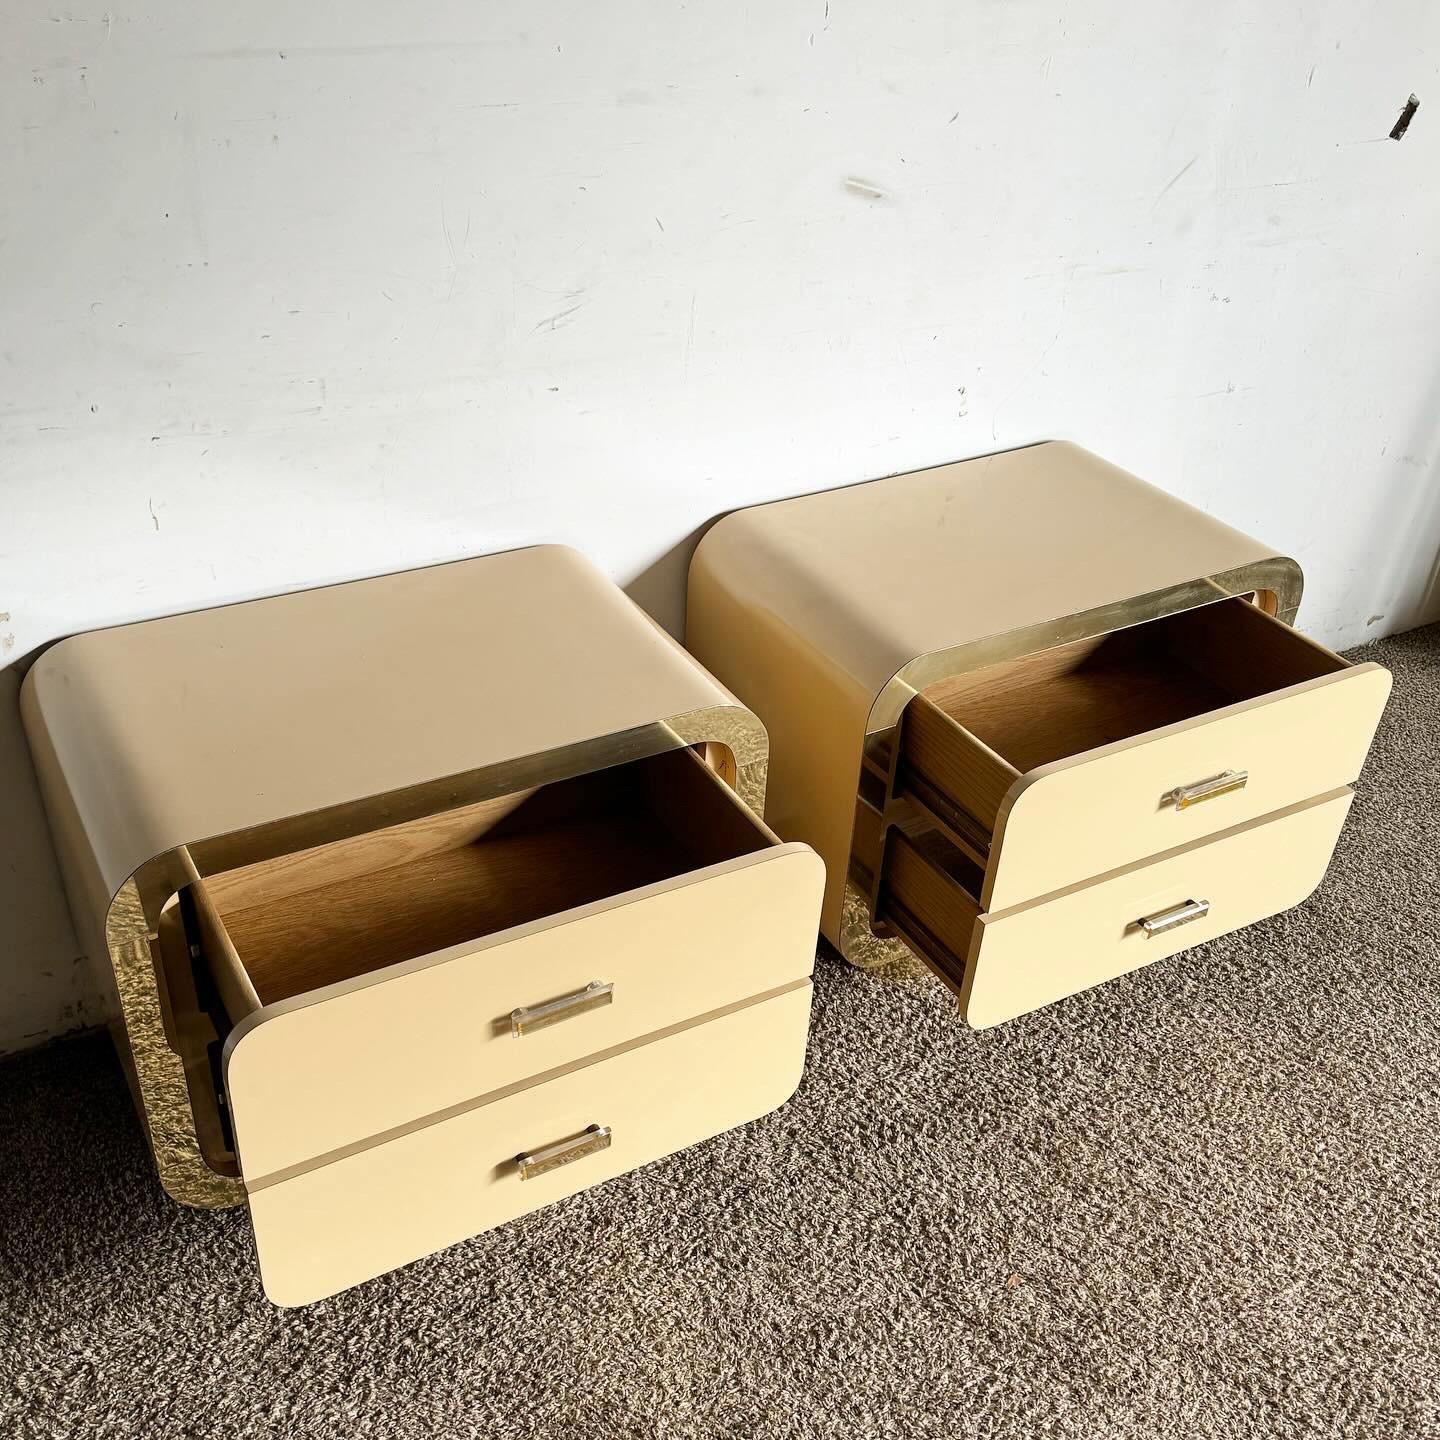 American Postmodern Flesh Lacquer Laminate Waterfall Nightstands With Gold Accents - Pair For Sale